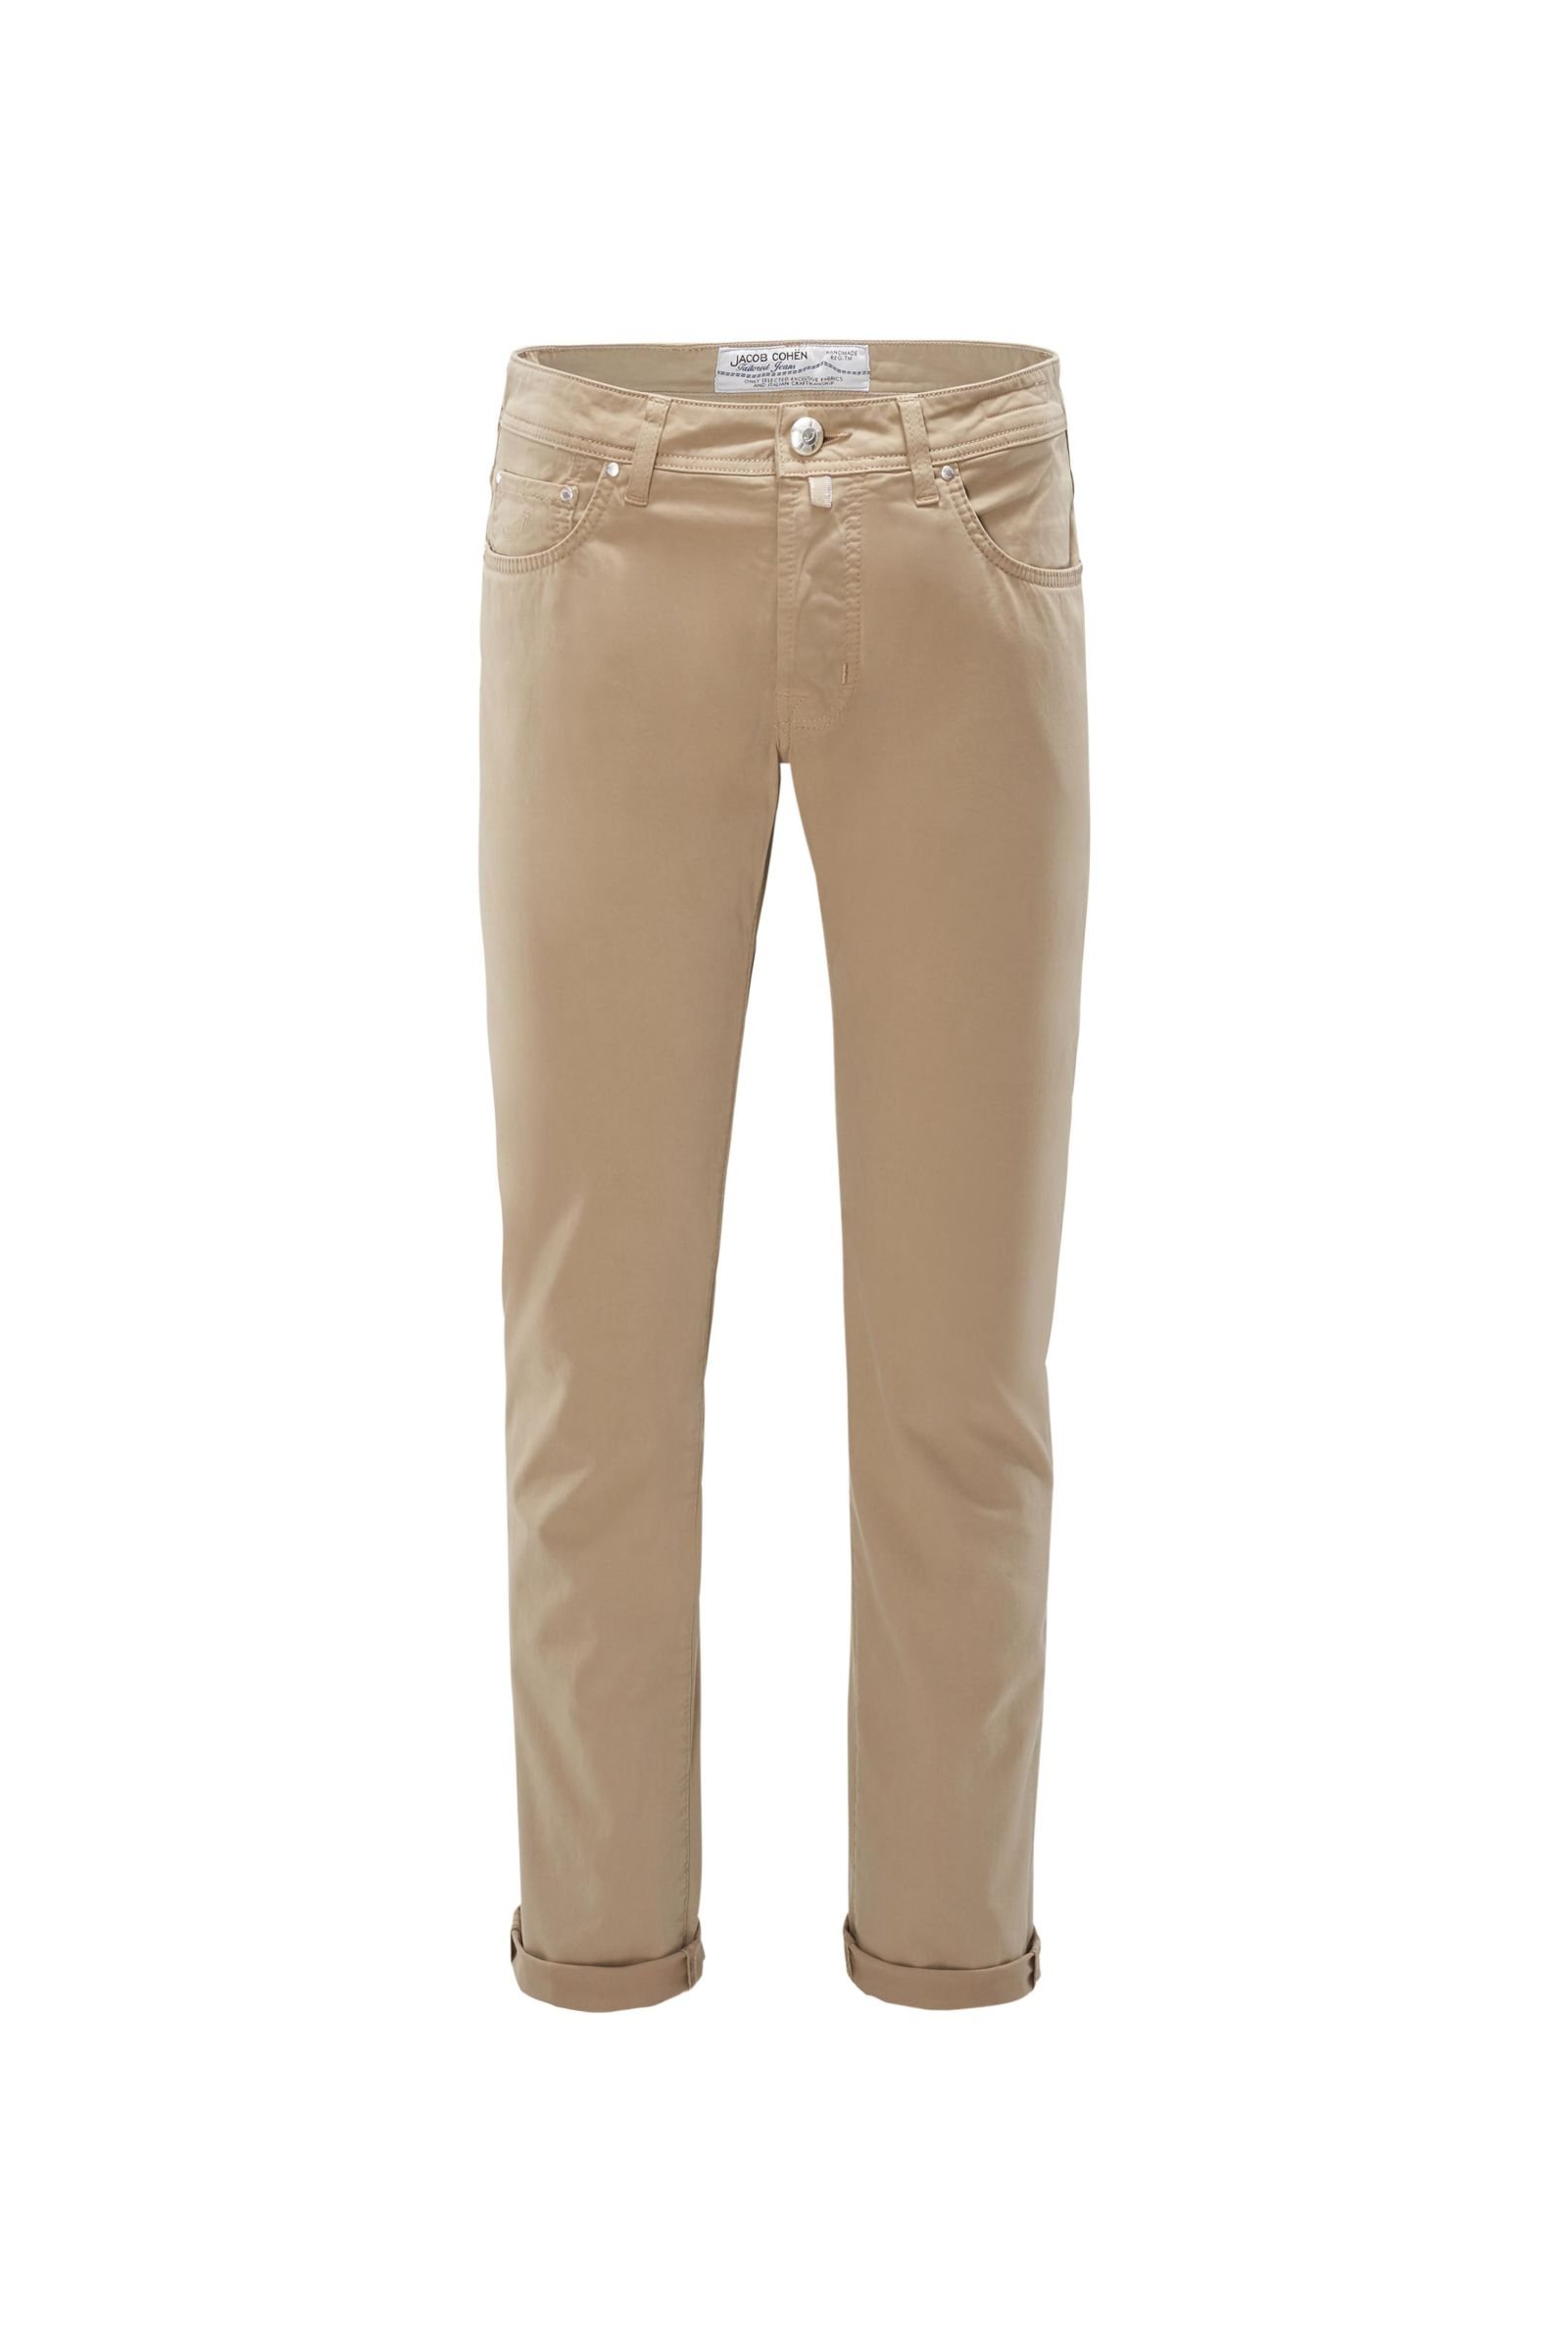 Cotton trousers 'PW688 Comfort Slim Fit' light brown